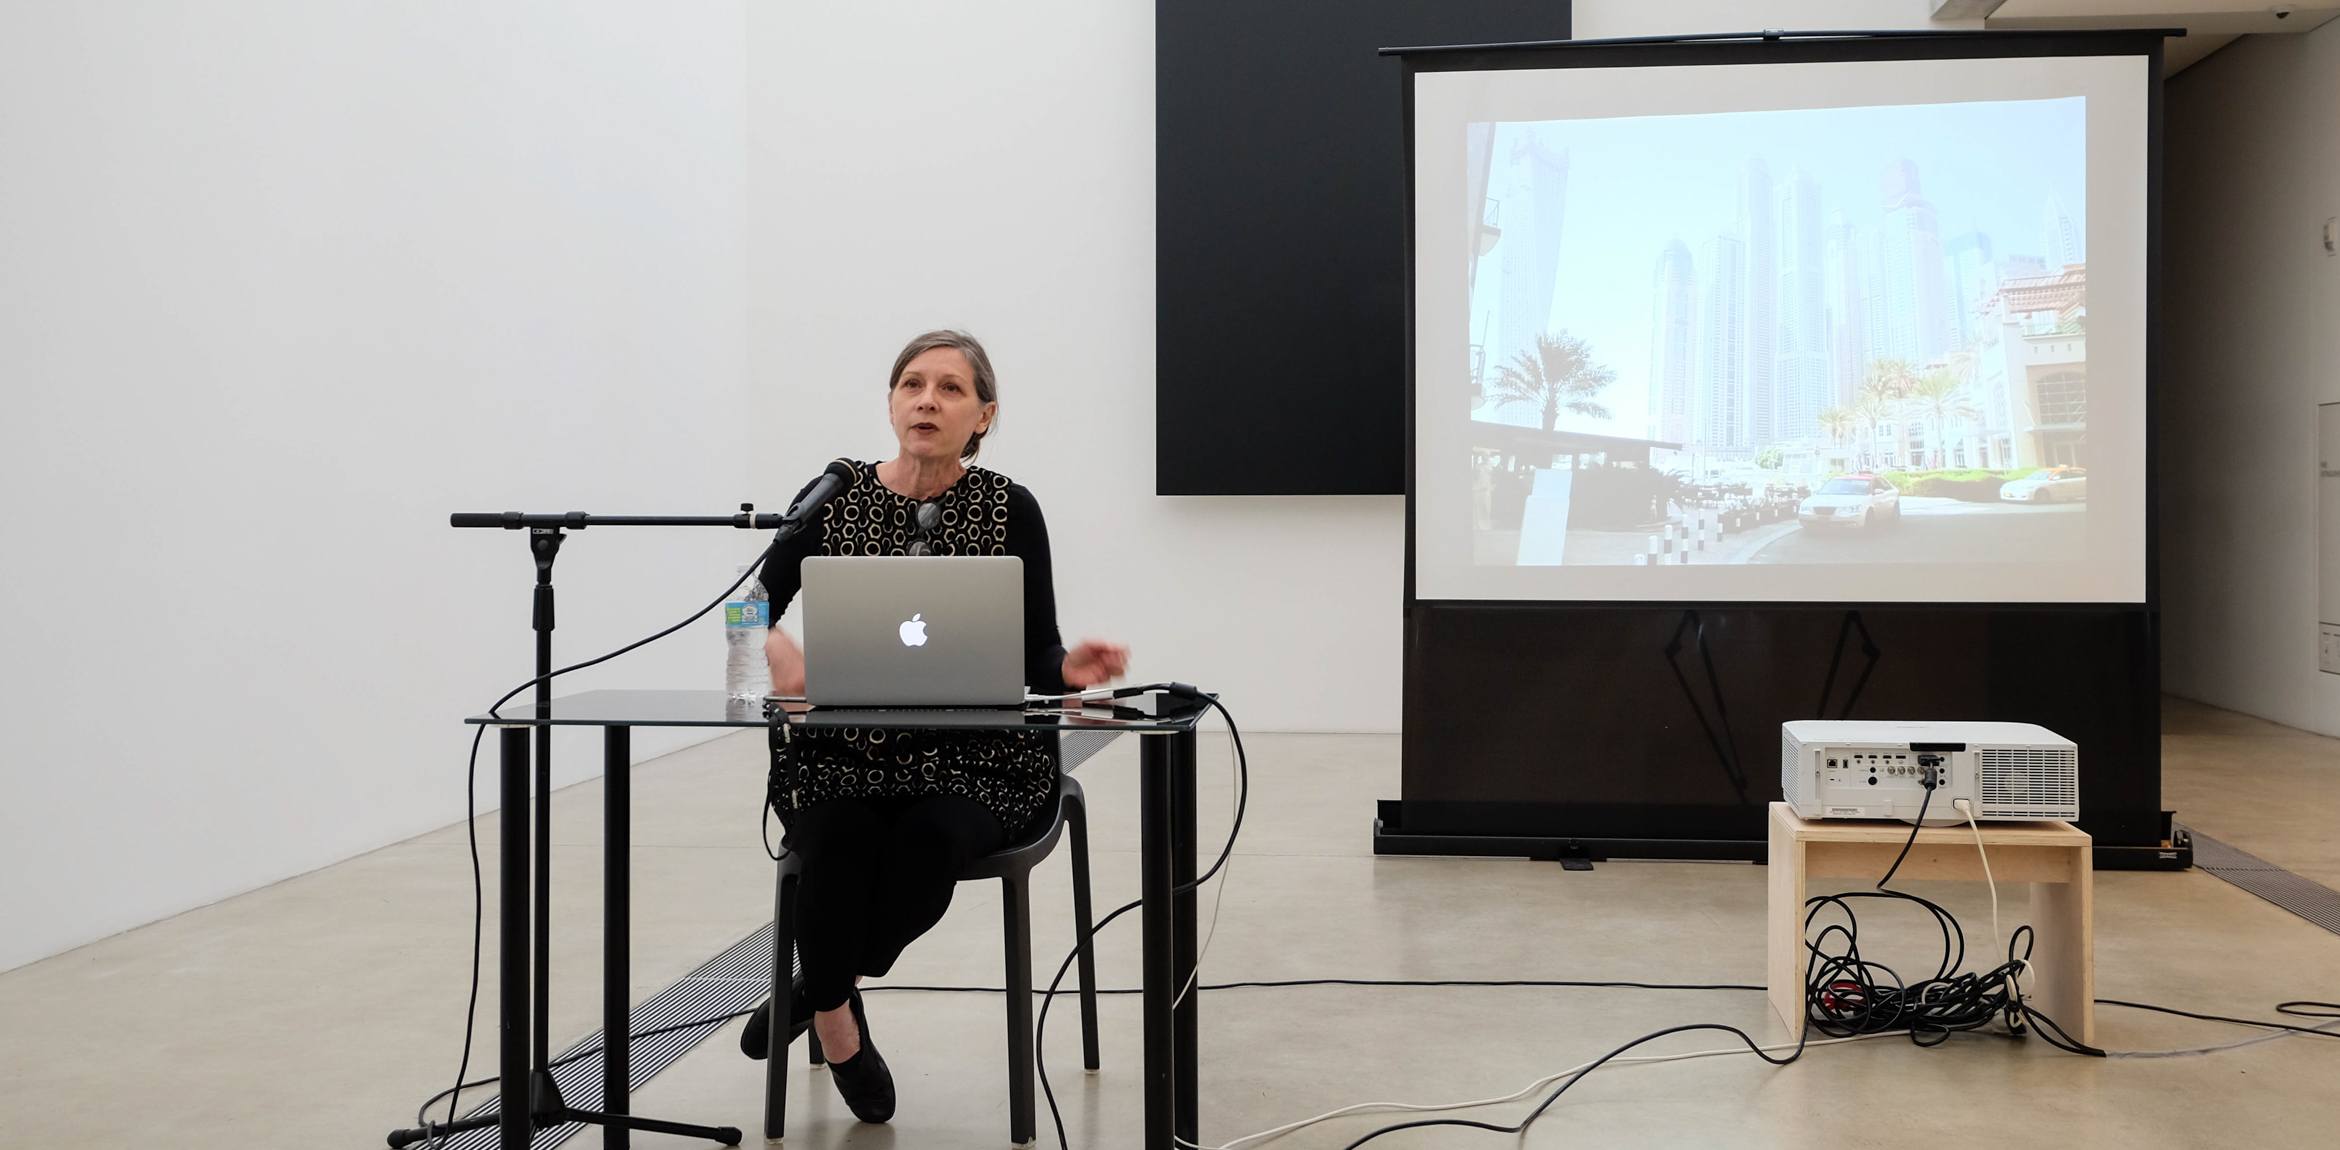 Keller Easterling sits at a small table with her laptop in front of Ellsworth Kelly's "Blue Black" and speaks into a microphone, a projector with supplemental images behind her.